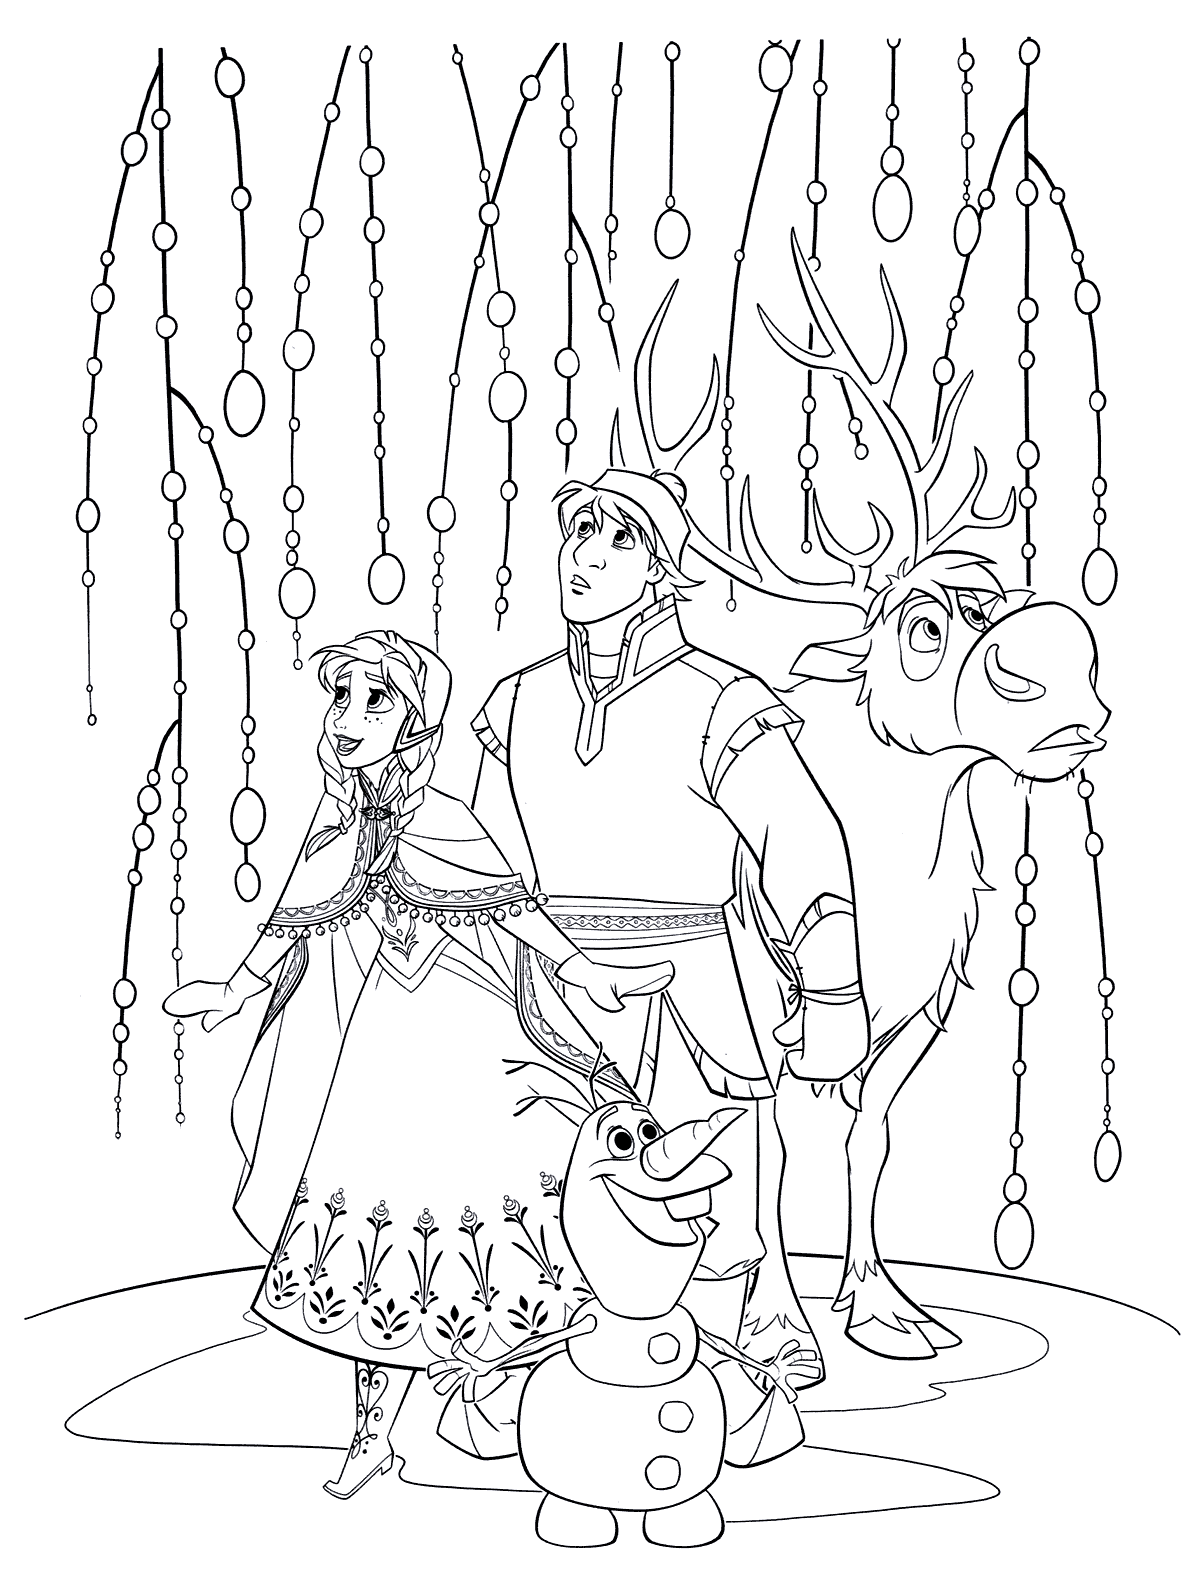 Coloring page - Anna and Kristoff